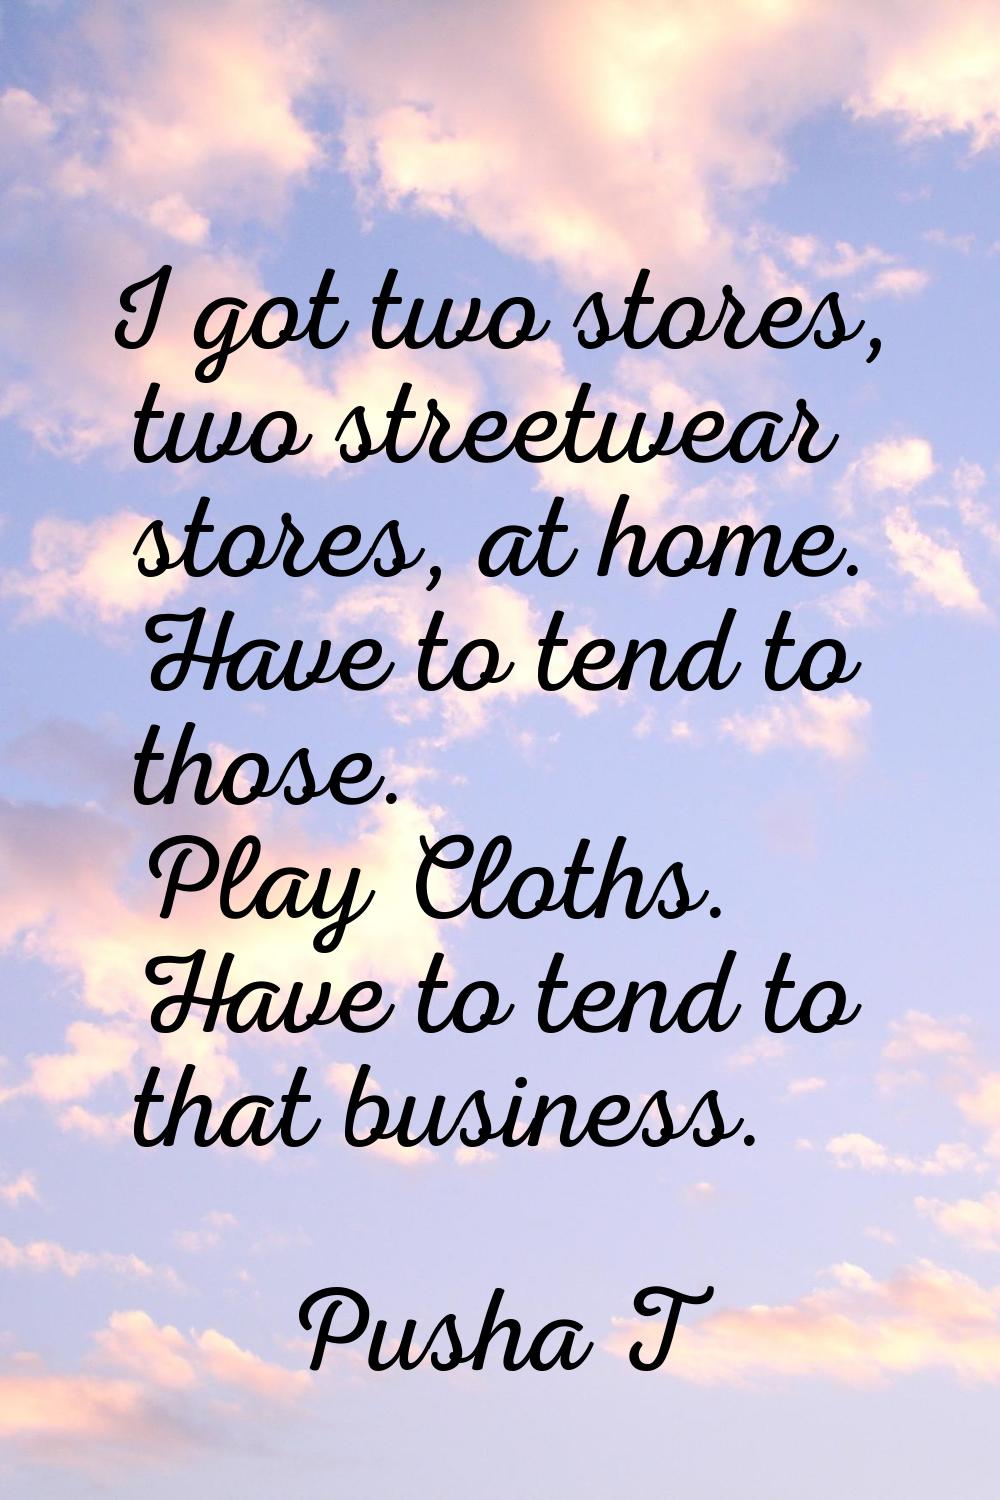 I got two stores, two streetwear stores, at home. Have to tend to those. Play Cloths. Have to tend 